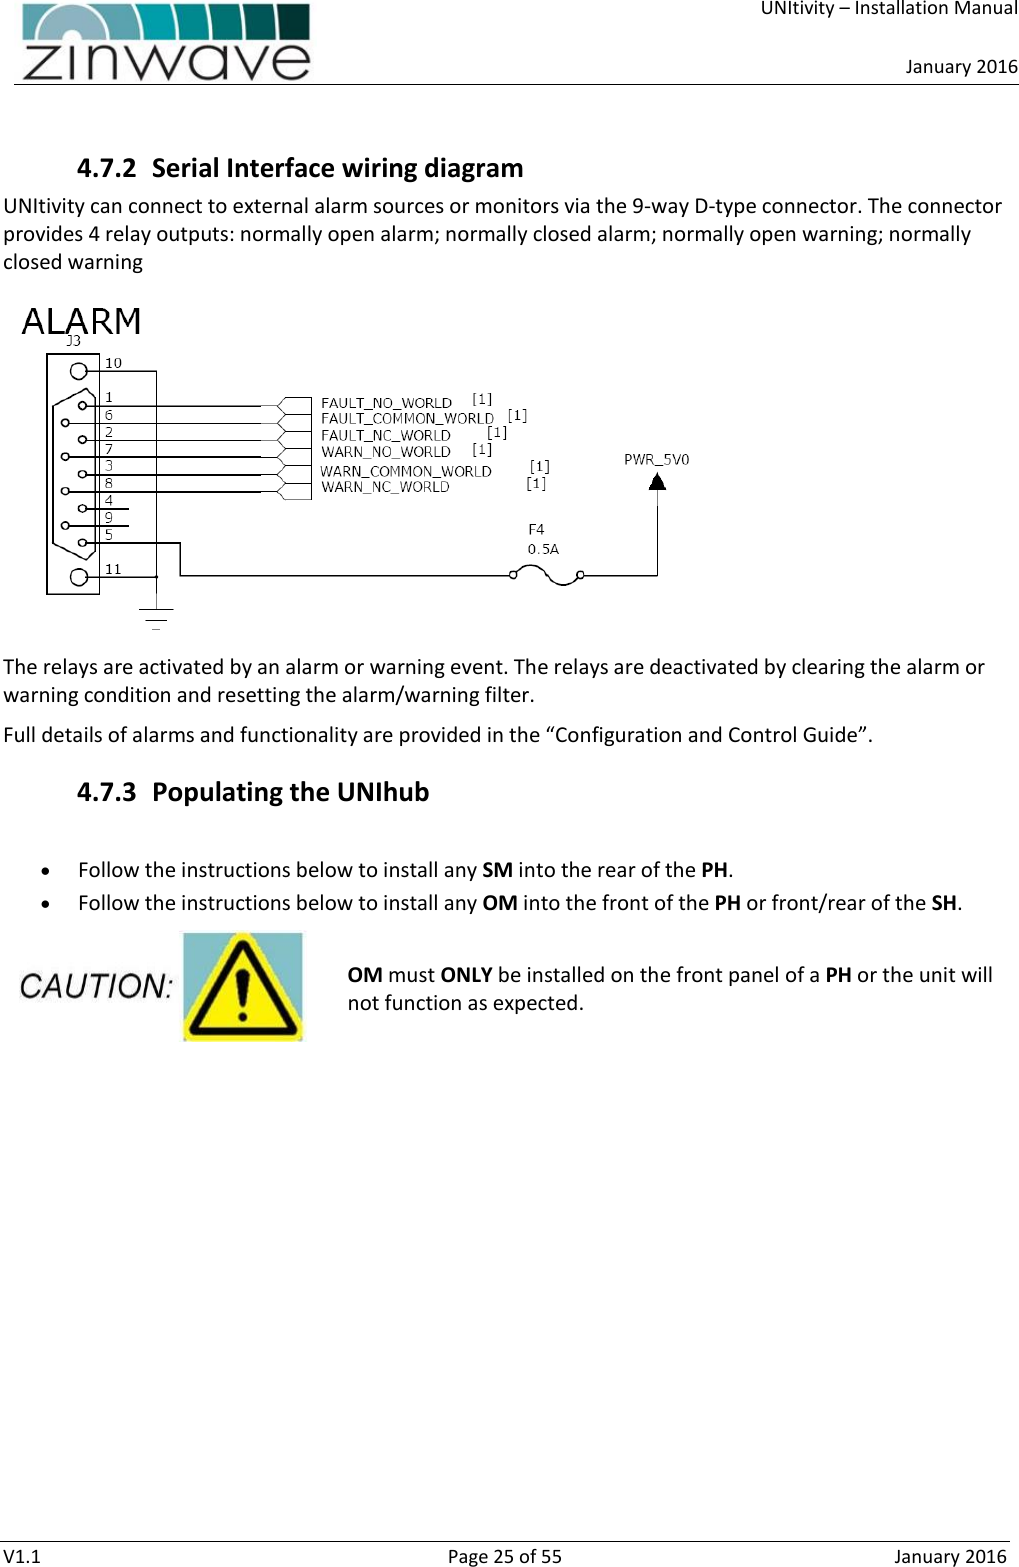     UNItivity – Installation Manual      January 2016  V1.1  Page 25 of 55  January 2016  4.7.2 Serial Interface wiring diagram UNItivity can connect to external alarm sources or monitors via the 9-way D-type connector. The connector provides 4 relay outputs: normally open alarm; normally closed alarm; normally open warning; normally closed warning   The relays are activated by an alarm or warning event. The relays are deactivated by clearing the alarm or warning condition and resetting the alarm/warning filter. Full details of alarms and functionality are provided in the “Configuration and Control Guide”. 4.7.3 Populating the UNIhub   Follow the instructions below to install any SM into the rear of the PH.  Follow the instructions below to install any OM into the front of the PH or front/rear of the SH.  OM must ONLY be installed on the front panel of a PH or the unit will not function as expected.     